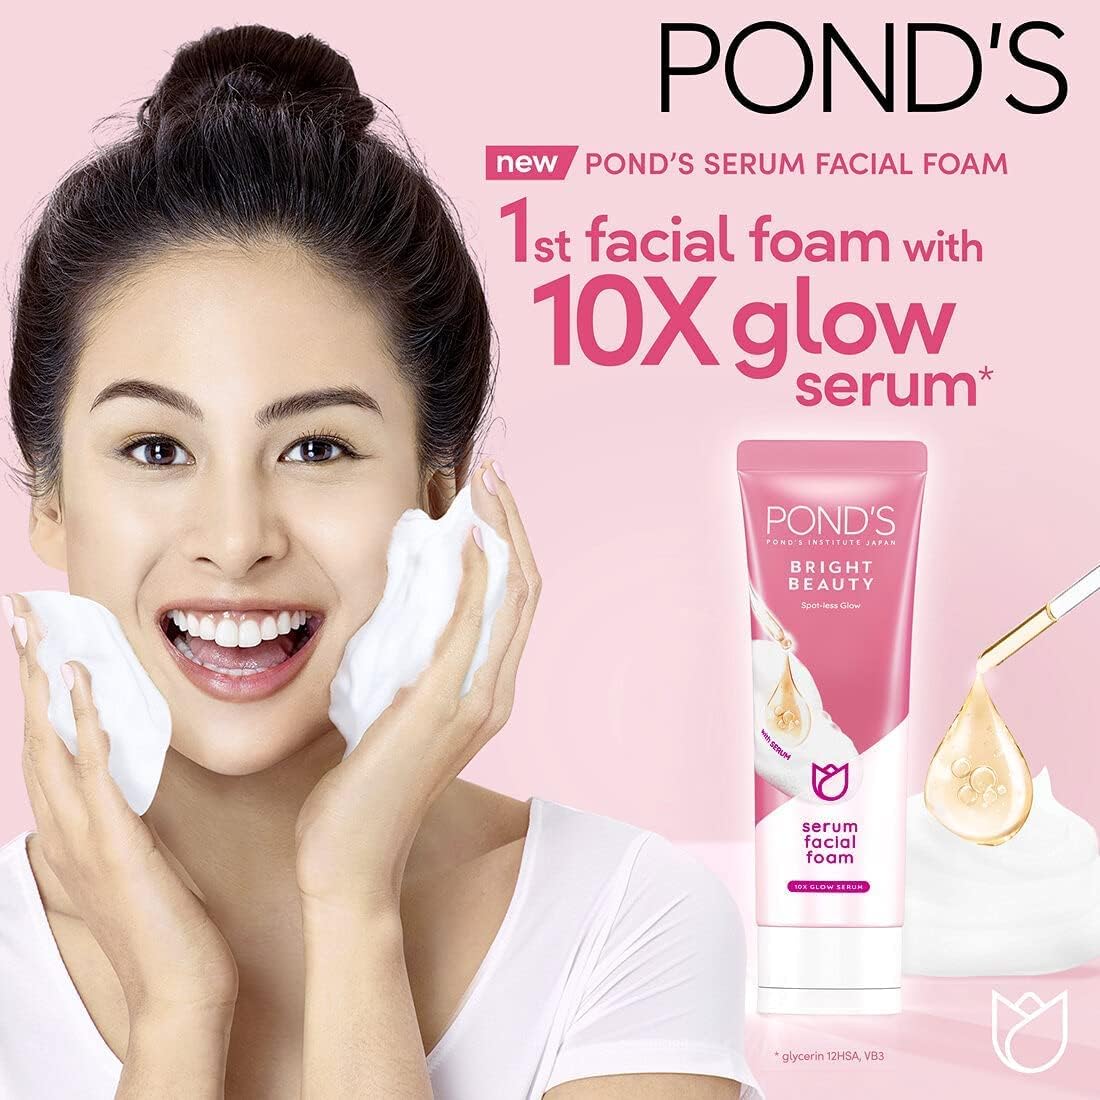 POND'S Bright Beauty Serum Facial Foam with Vitamin B3 Spotless Glow for brighter, 100 gm